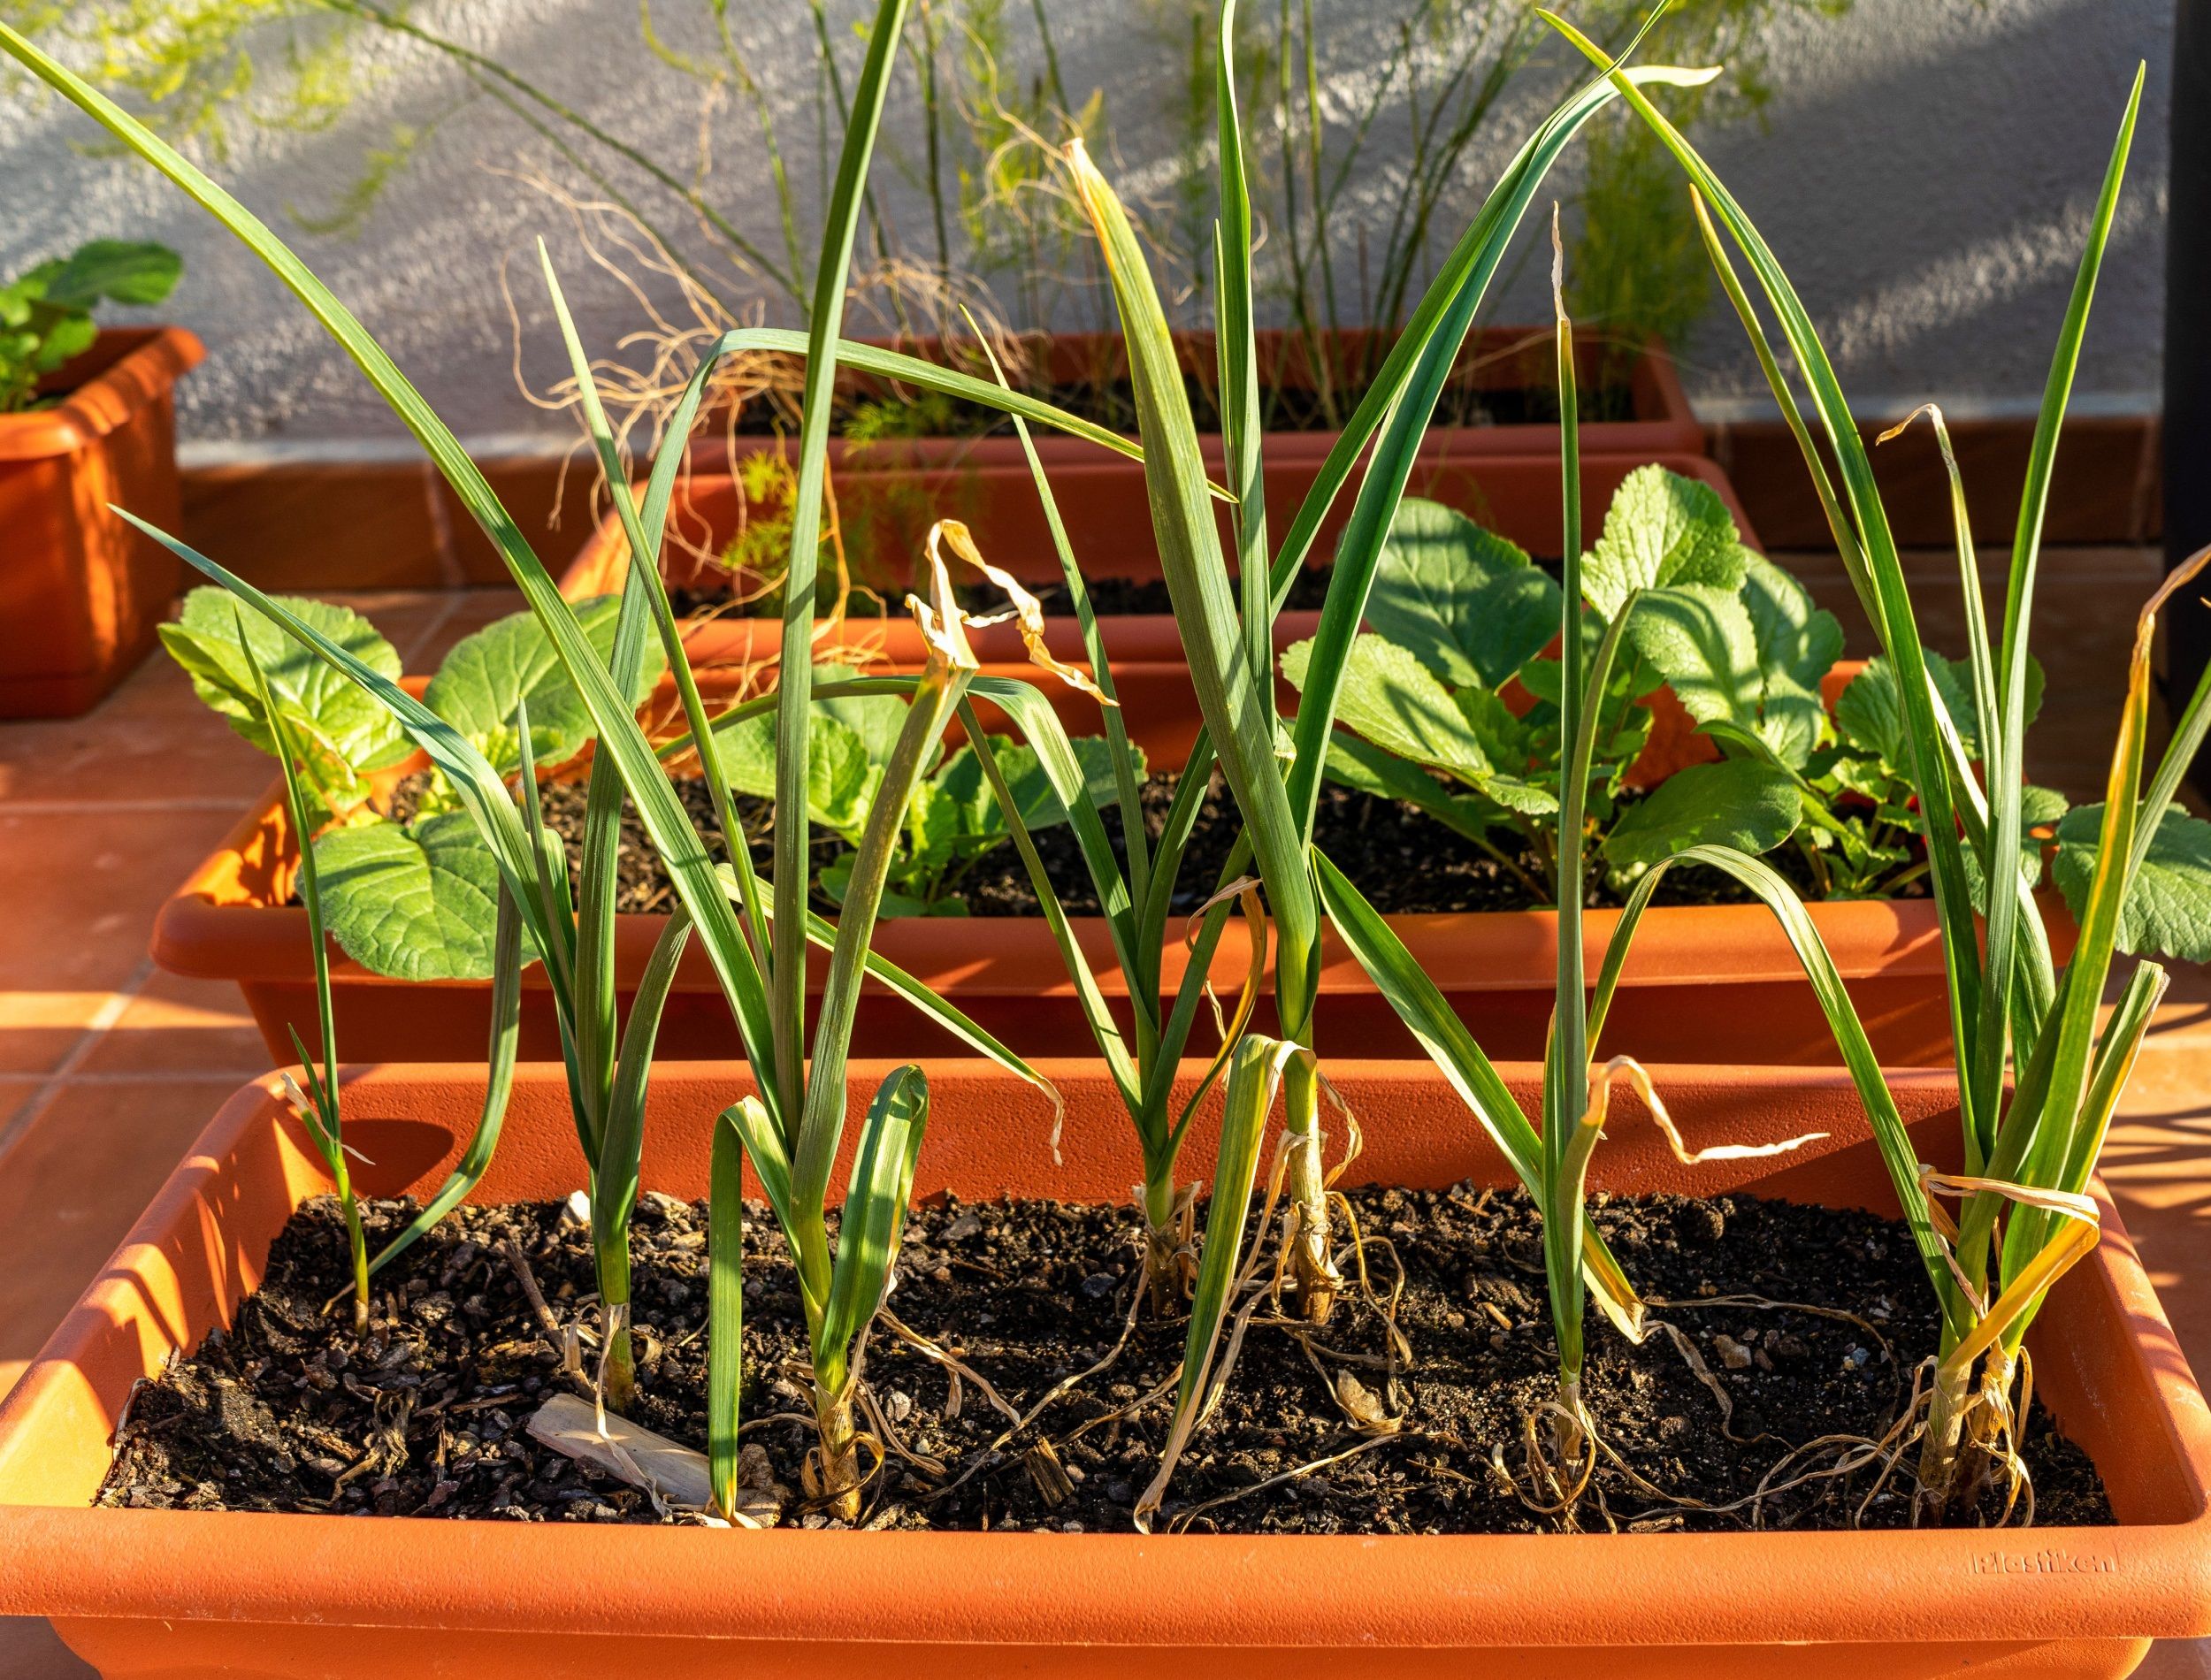 View of an urban garden in plastic pots with chives and garlic in the foreground. Selective focus. Eco food concept